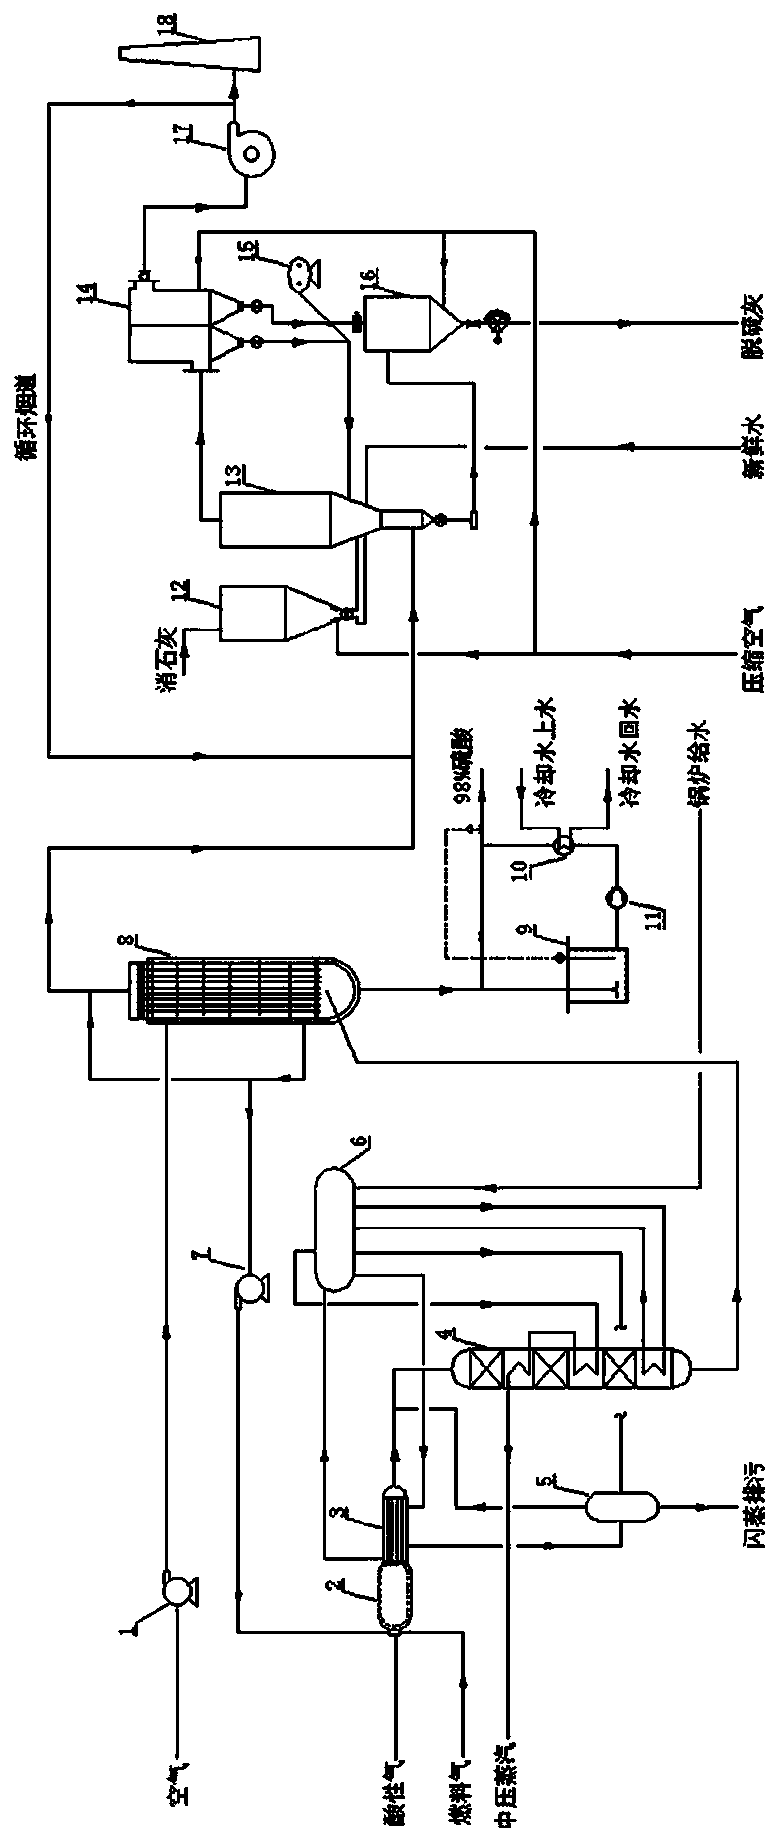 Acid gas wet method acid making technology combined with semidry method tail gas desulfurization